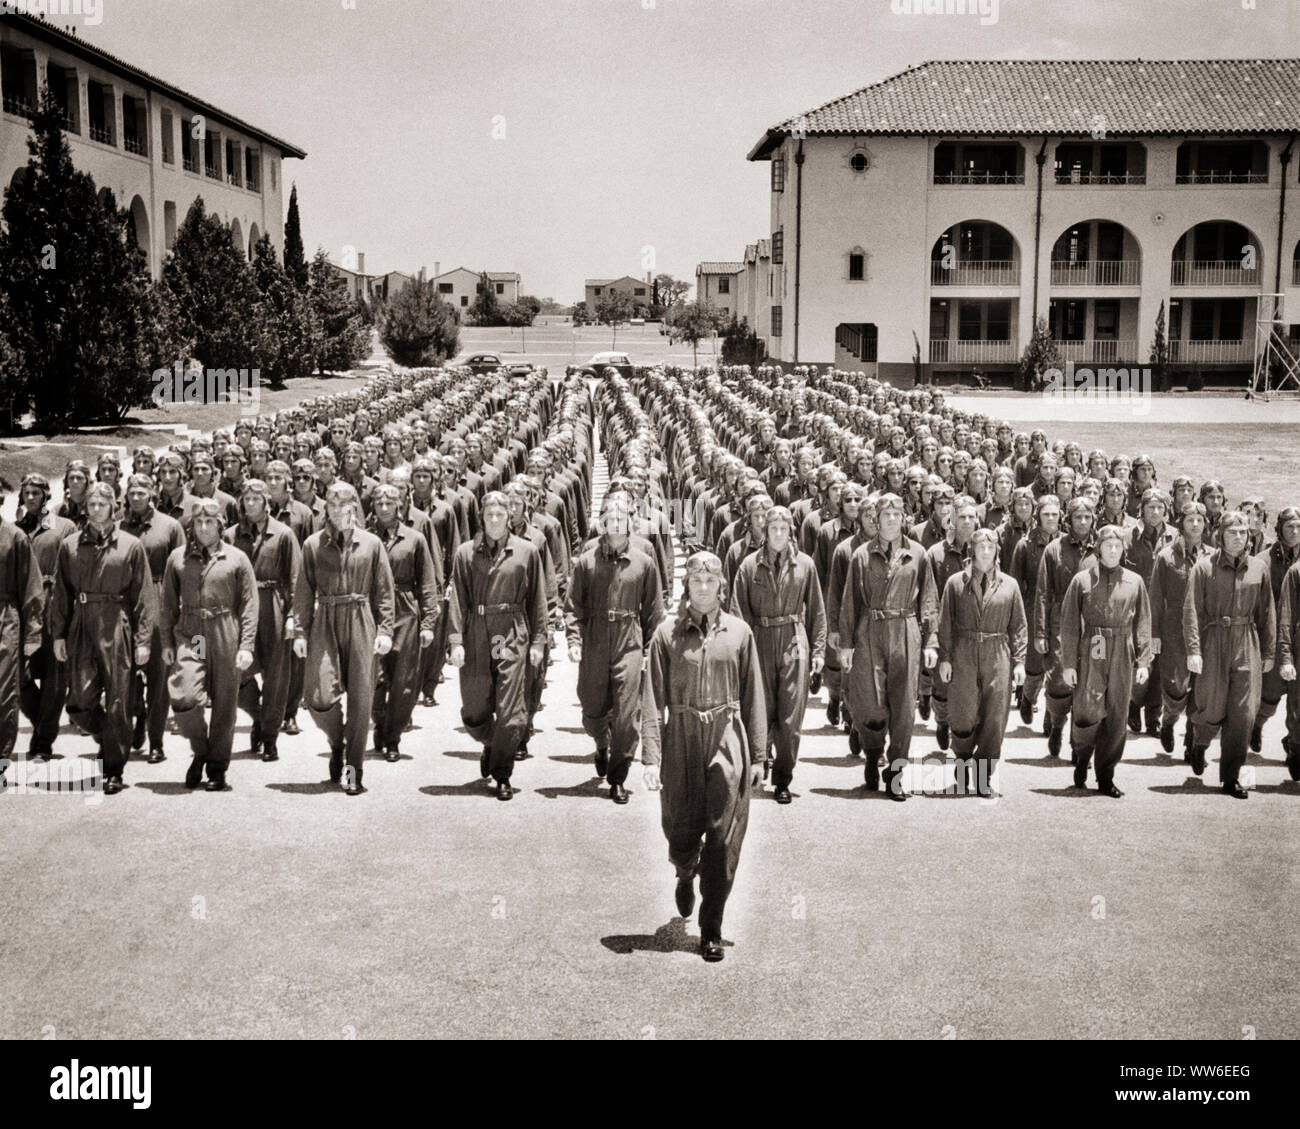 1940s ROWS OF UNITED STATES ARMY AIR CORPS FLYING CADETS IN UNIFORM PILOT FLIGHT TRAINING SCHOOL RANDOLPH FIELD TEXAS USA - a1340 HAR001 HARS MALES RISK B&W FILE PILOTS HIGH ANGLE ADVENTURE DISCOVERY DRILLING COURAGE ATTENTION WORLD WARS WORLD WAR WORLD WAR TWO WORLD WAR II AT IN OF FORMATION ROWS UNIFORMS CADETS CONCEPTUAL WORLD WAR 2 FACILITY RANDOLPH FIELD TX YOUNG ADULT MAN AIR CORPS BARRACKS BLACK AND WHITE CAUCASIAN ETHNICITY HAR001 MANPOWER OLD FASHIONED RANK RANK AND FILE Stock Photo